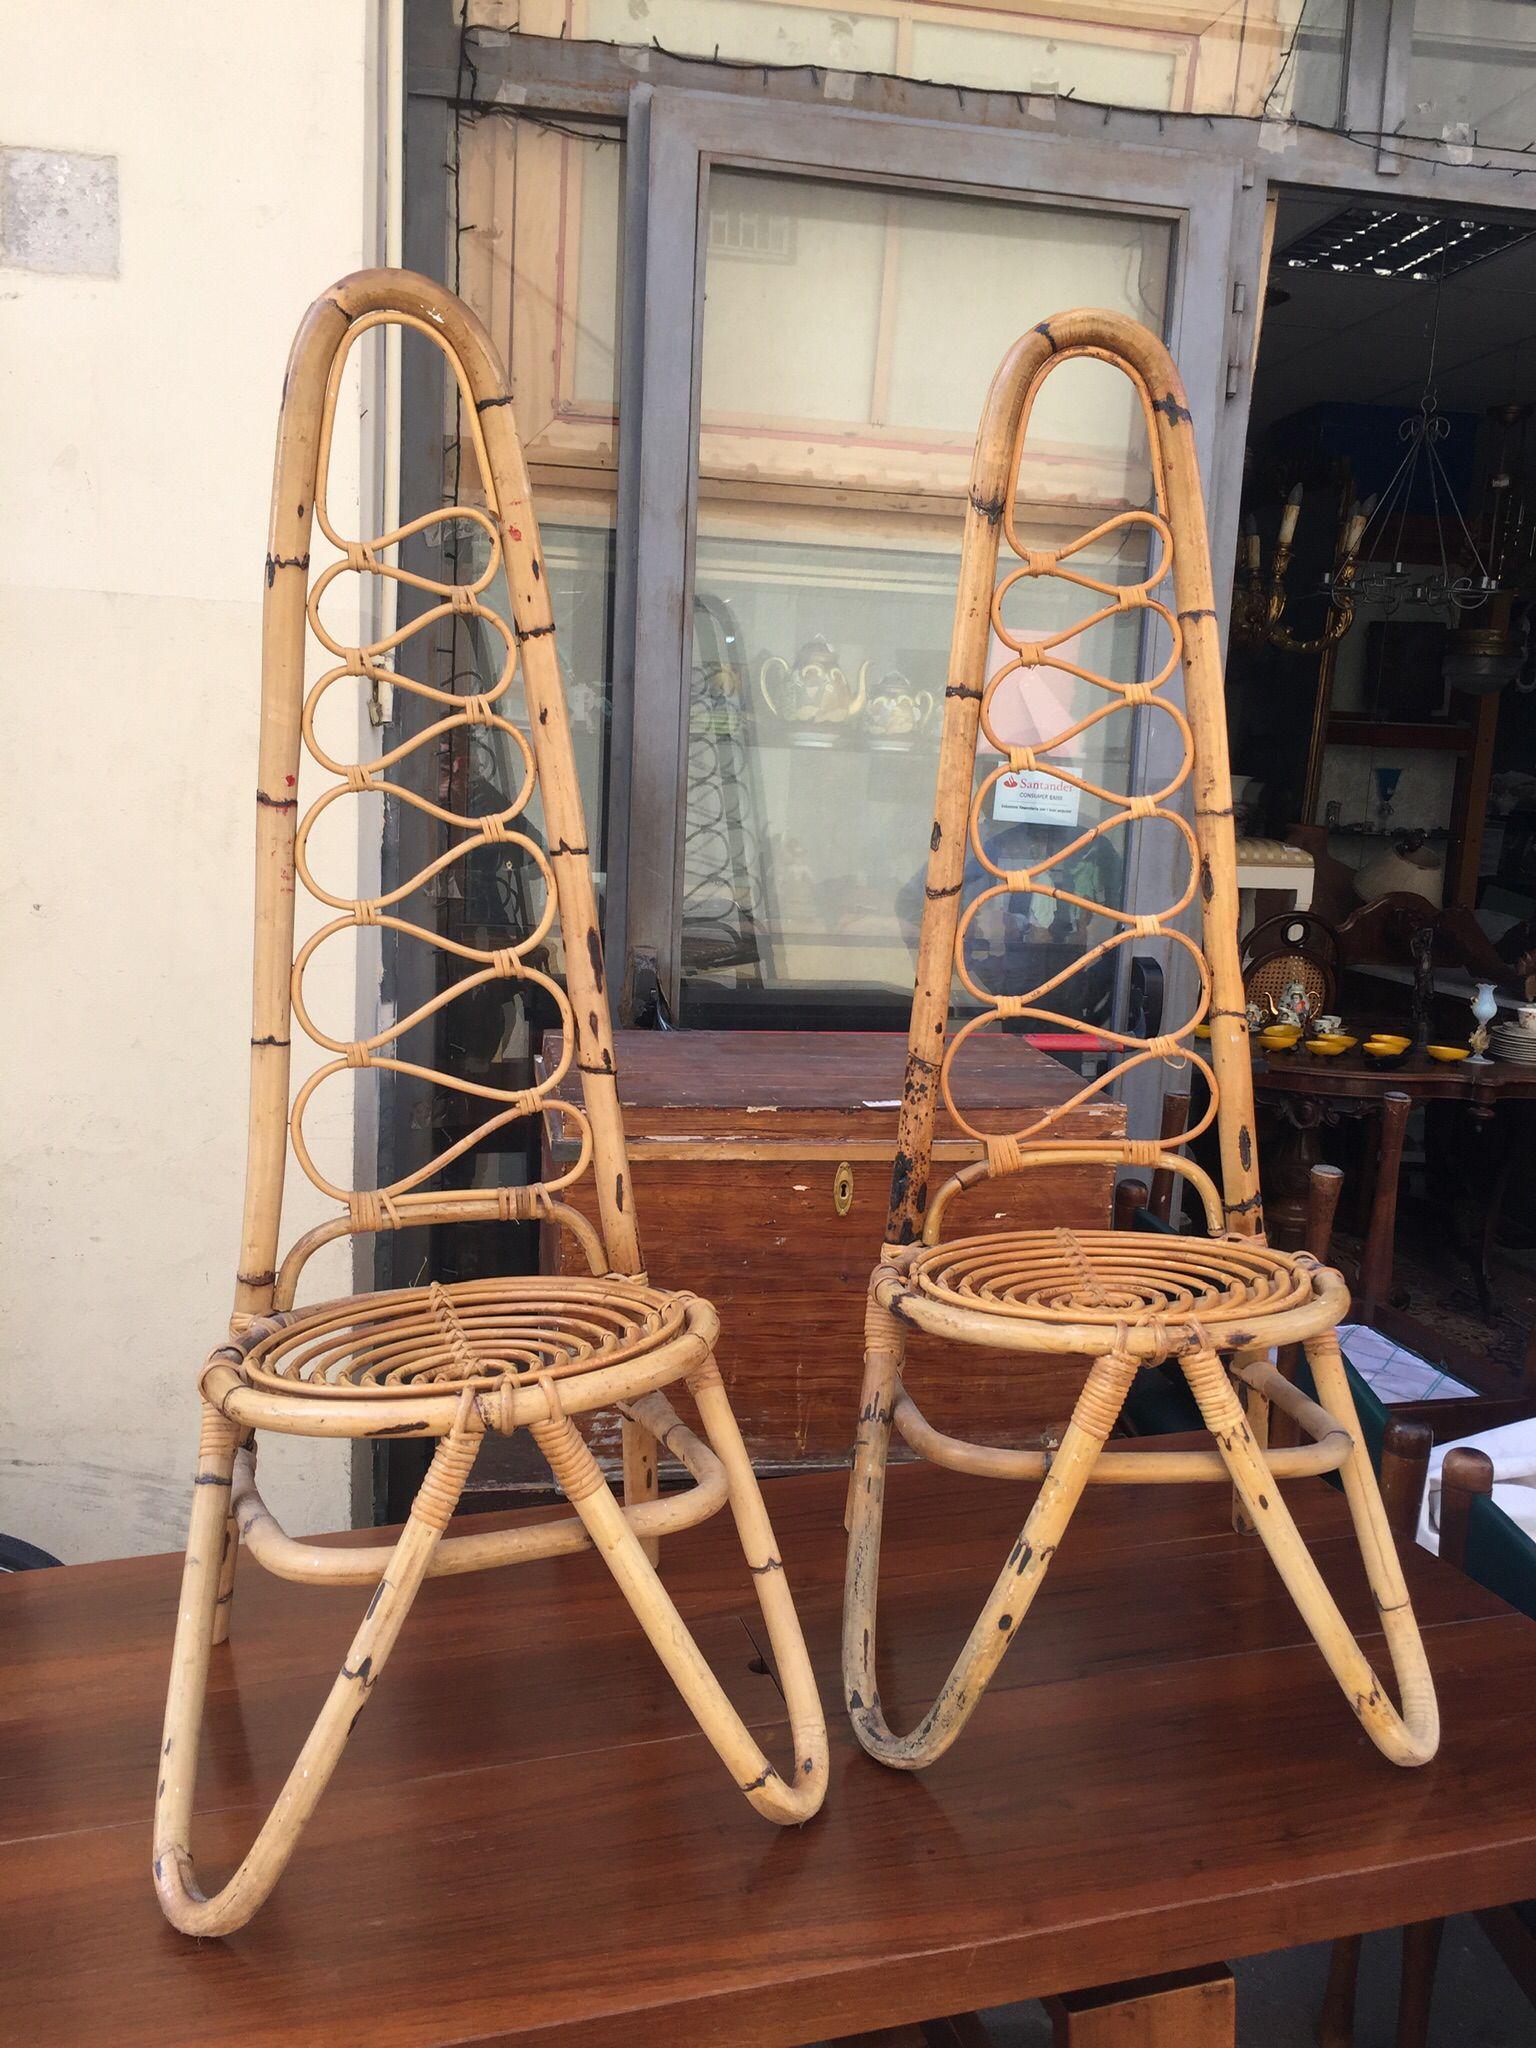 Pair of elegant and iconic chairs made of bamboo by Pierantonio Bonacina. Founded in 1889, the company began to make each piece by hand by skilled craftsmen who, with care and experience, bent the reeds and intertwined the pith threads of vegetable